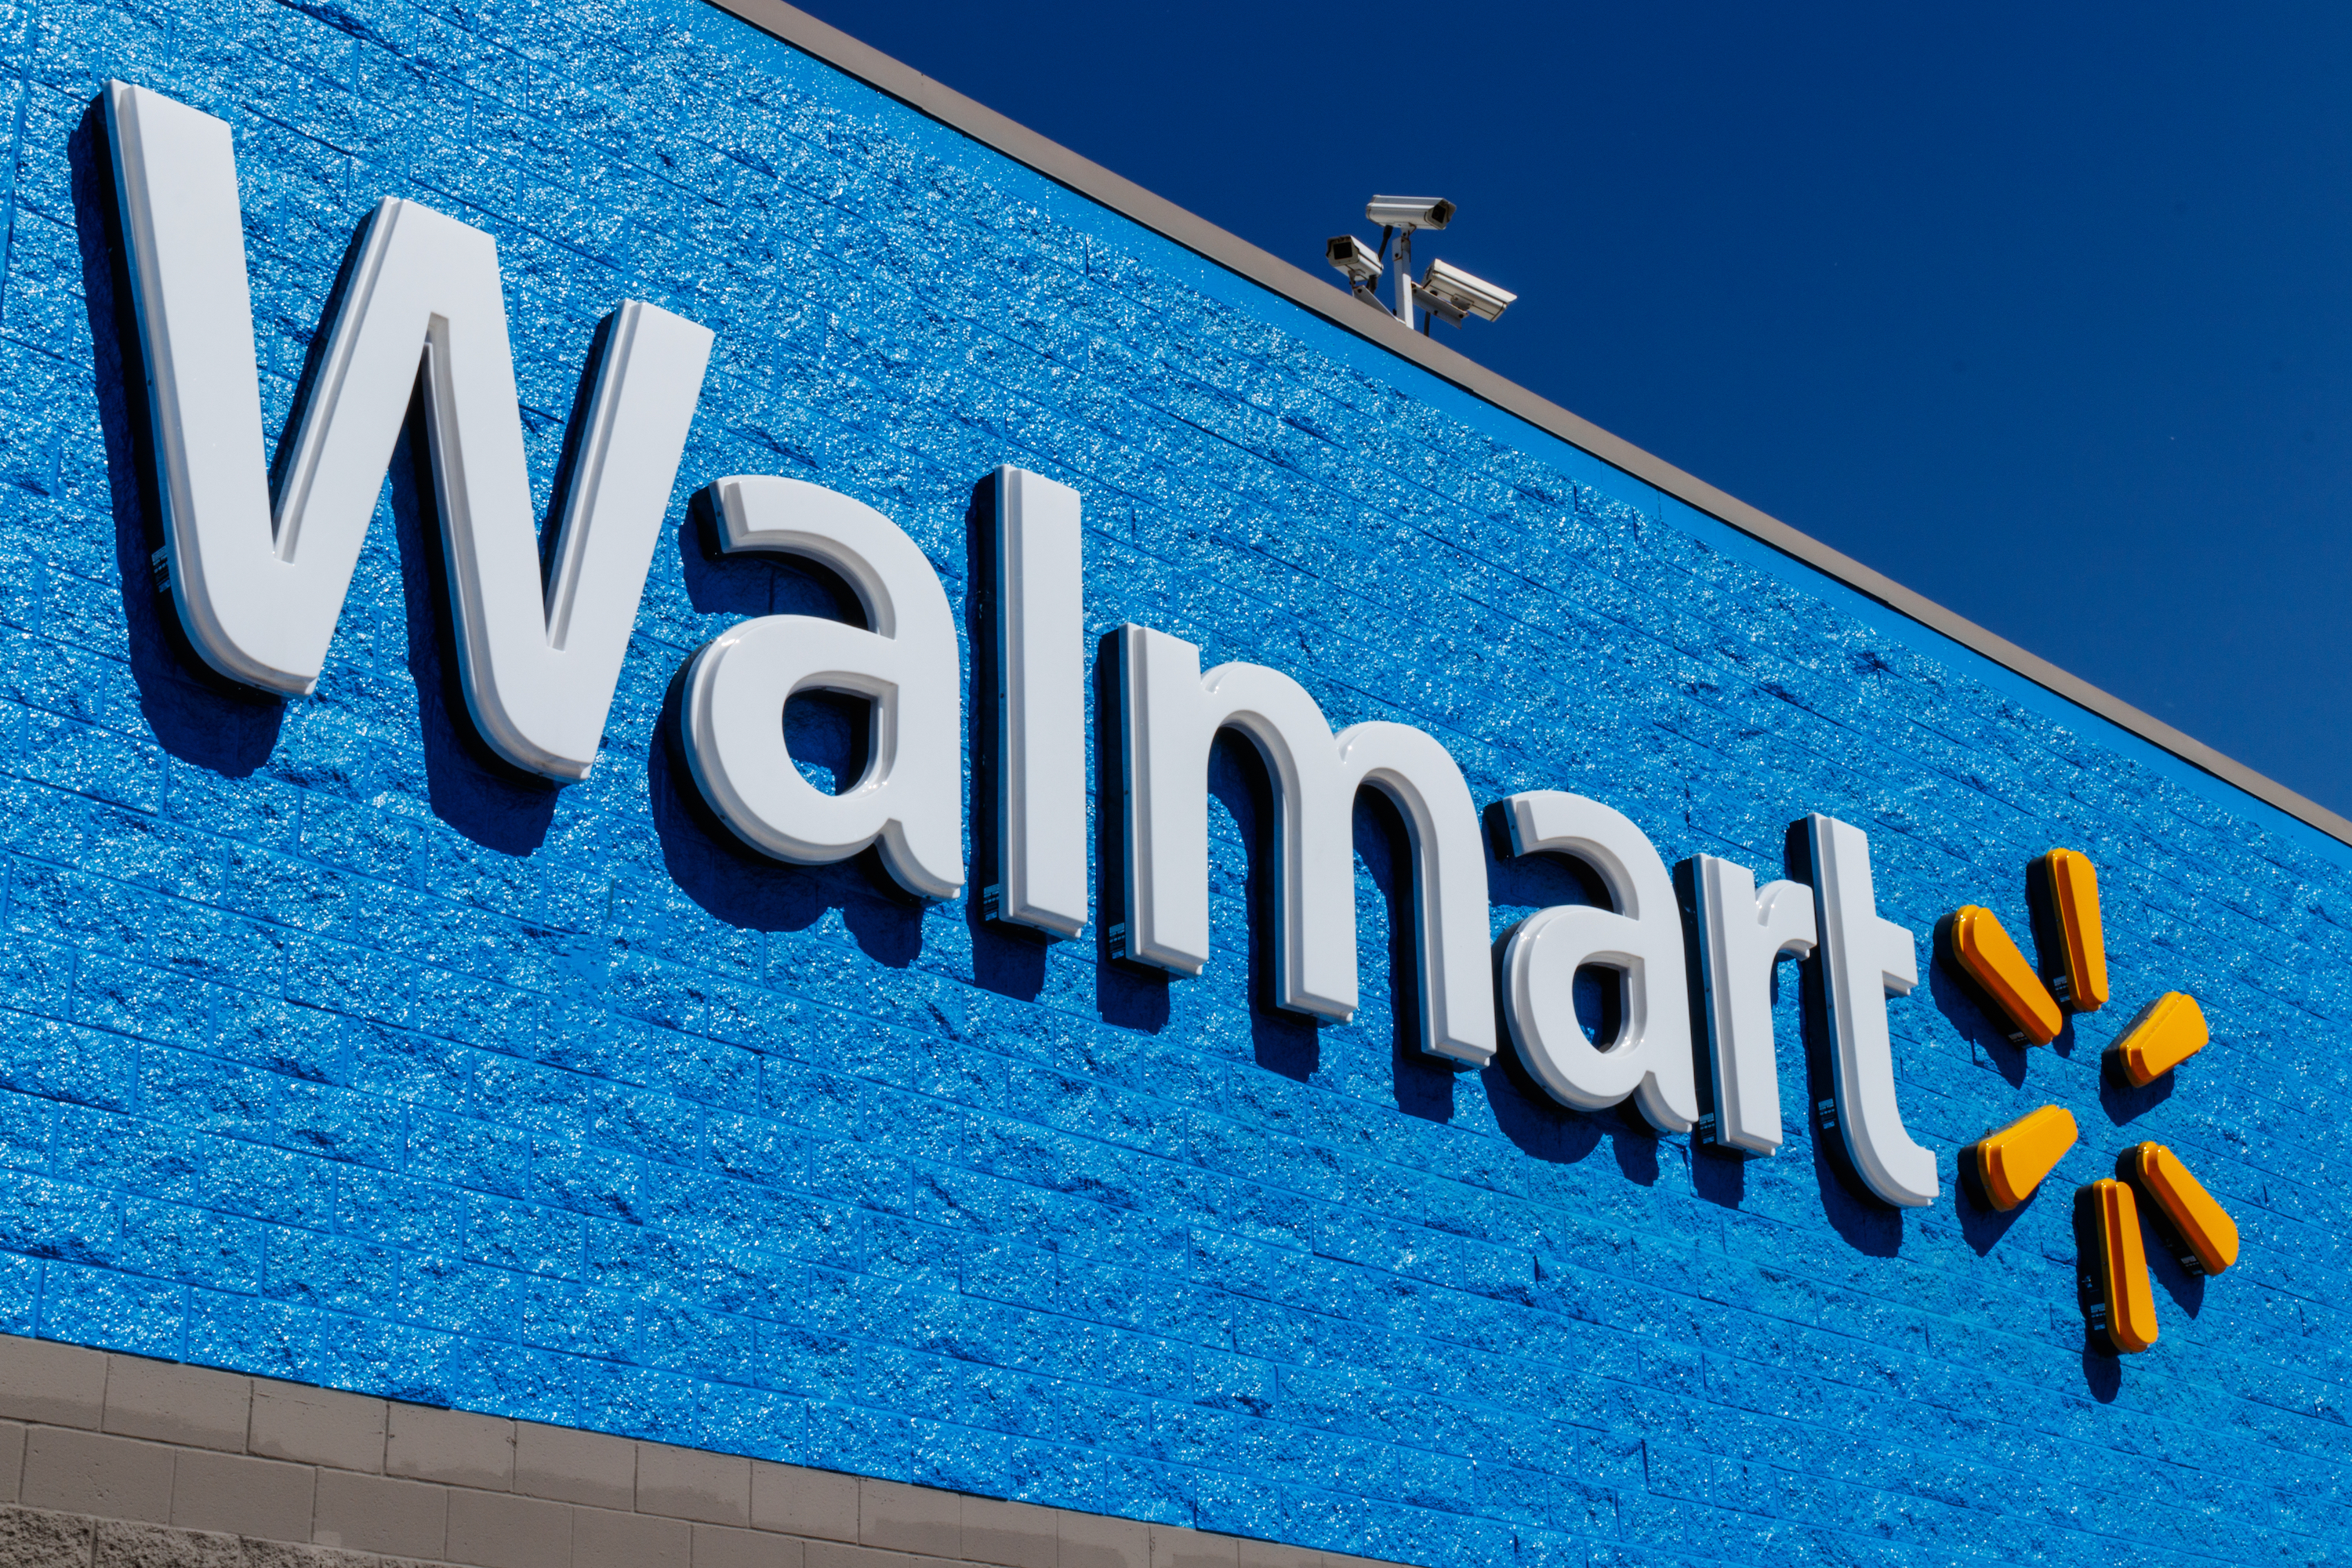 Walmart Labor Day sale: Shop our top picks from the savings event